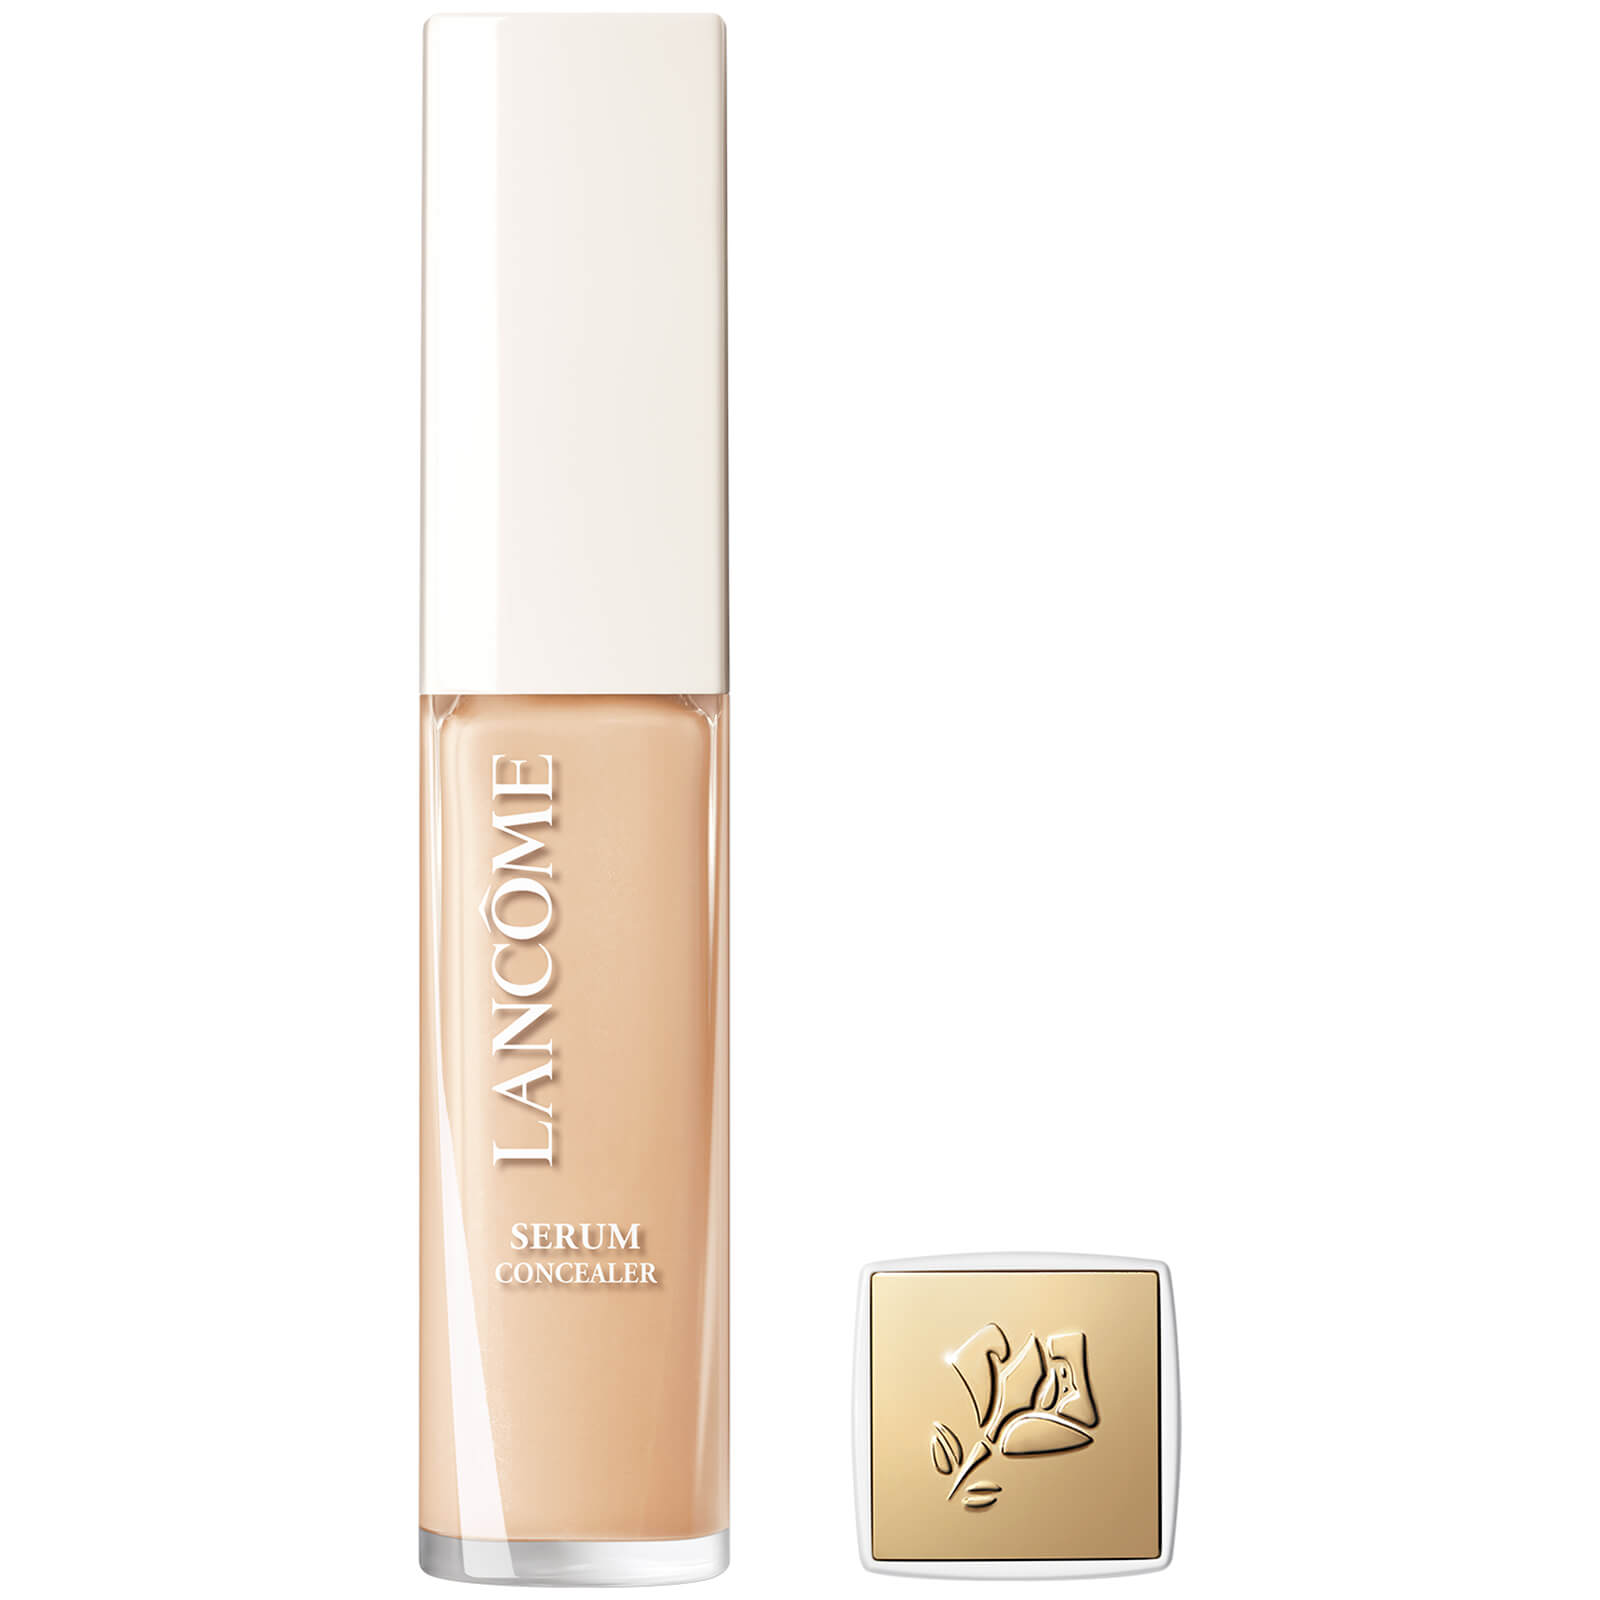 Lancôme Teint Idôle Ultra Wear Care and Glow Concealer 13ml (Various Shades) - 115C